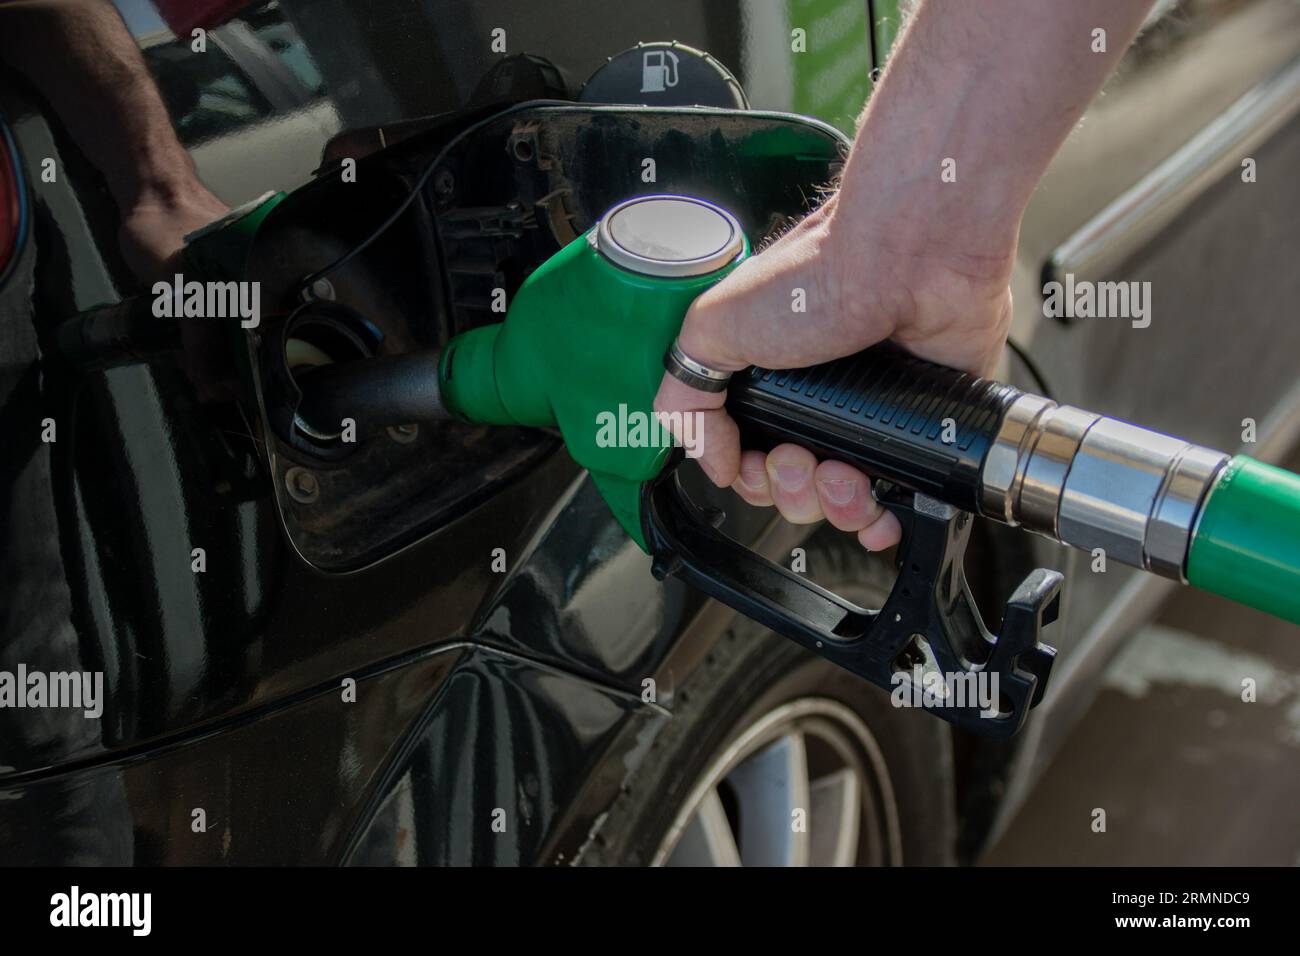 Overhead close-up of a Caucasian man's hand refueling his car with unleaded fuel Stock Photo